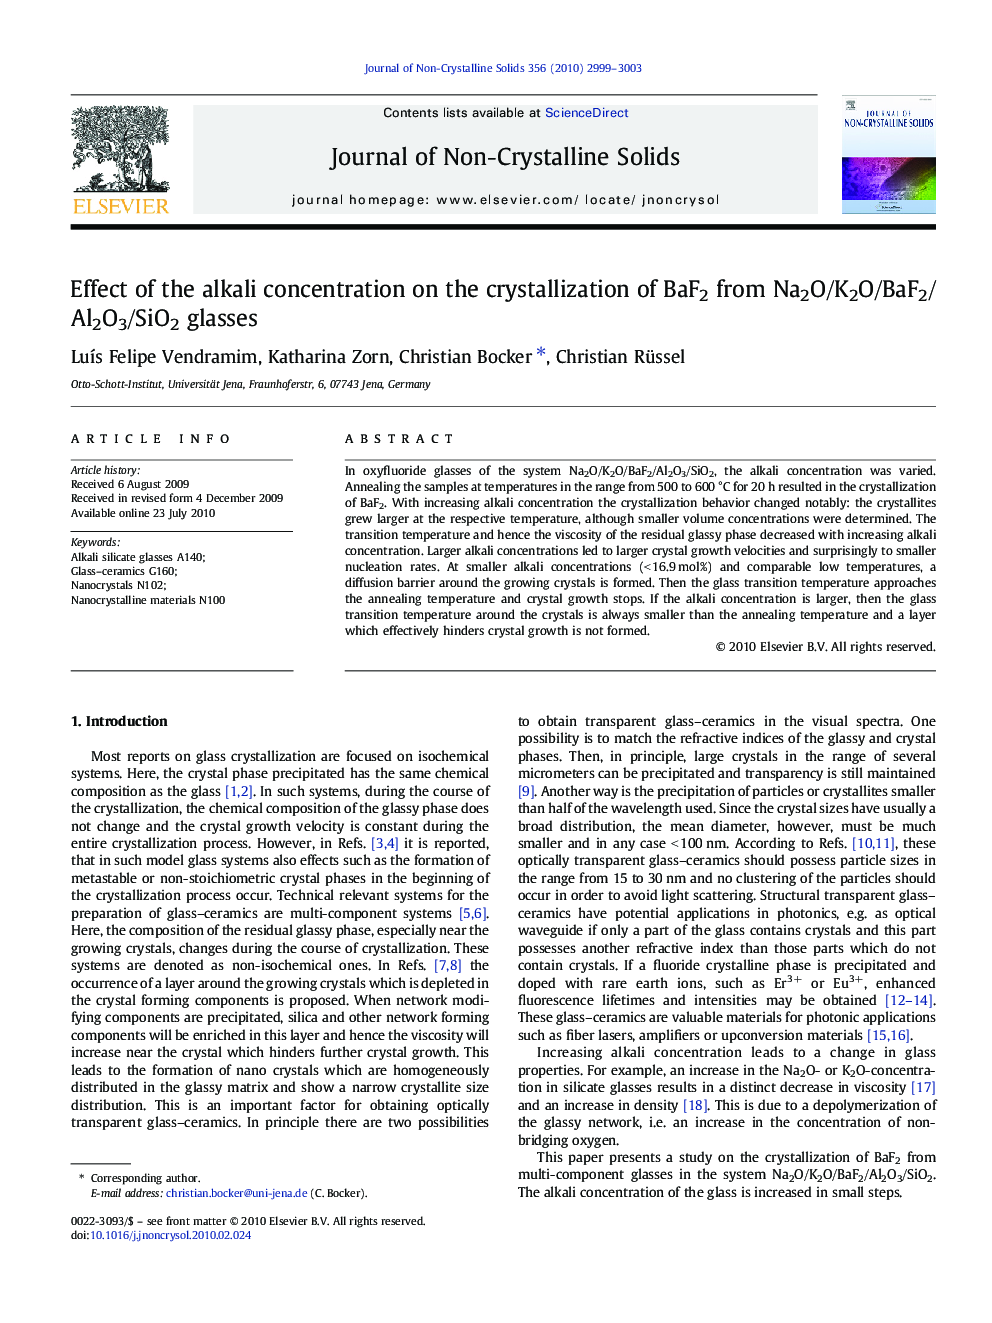 Effect of the alkali concentration on the crystallization of BaF2 from Na2O/K2O/BaF2/Al2O3/SiO2 glasses